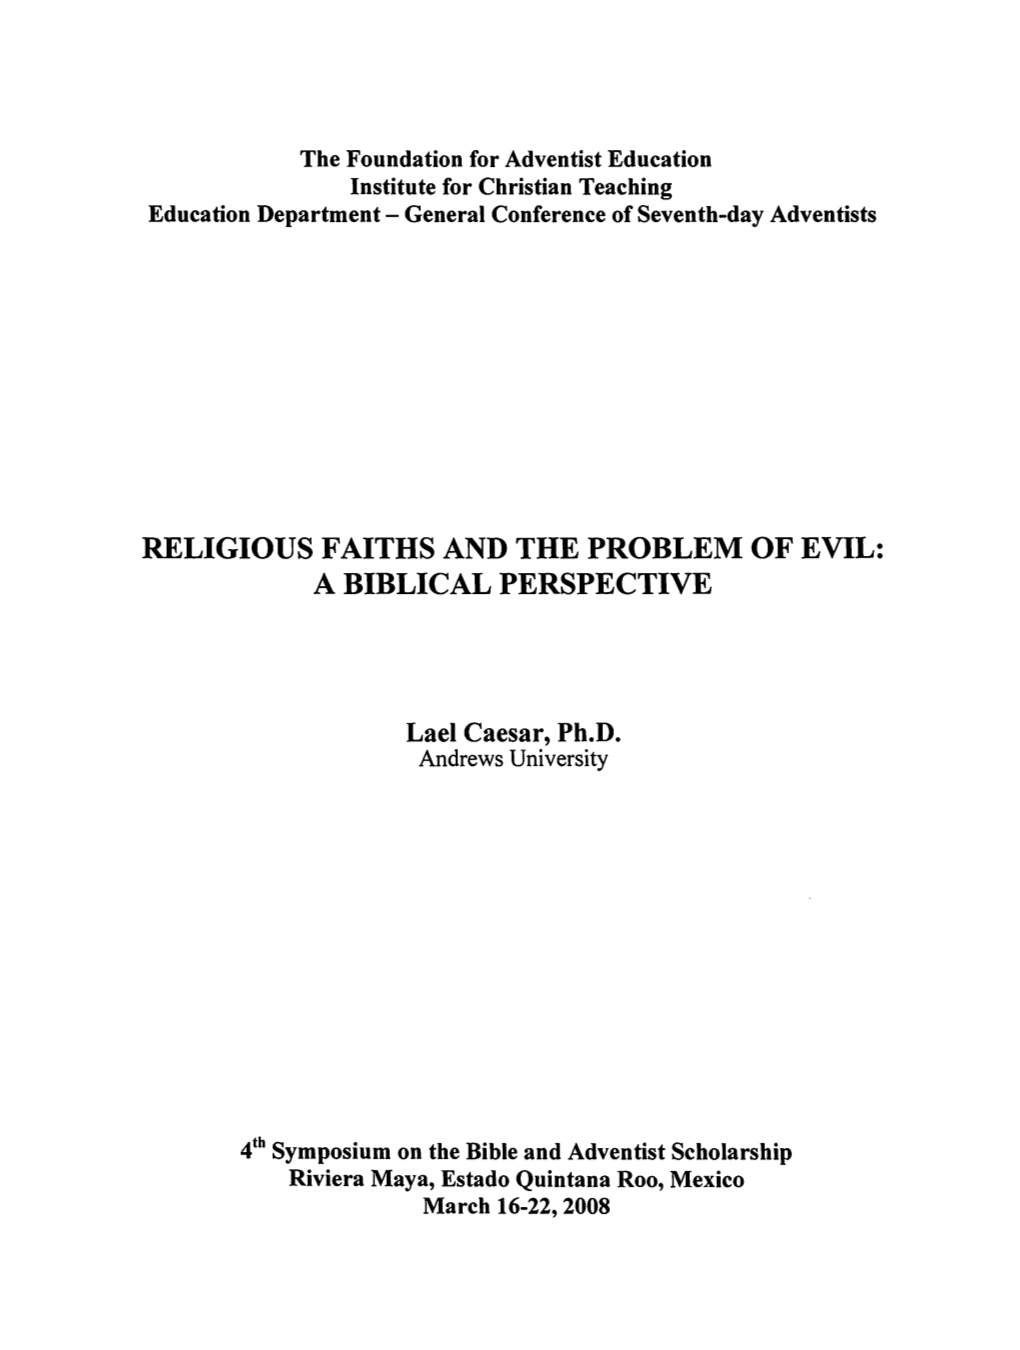 Religious Faiths and the Problem of Evil: a Biblical Perspective